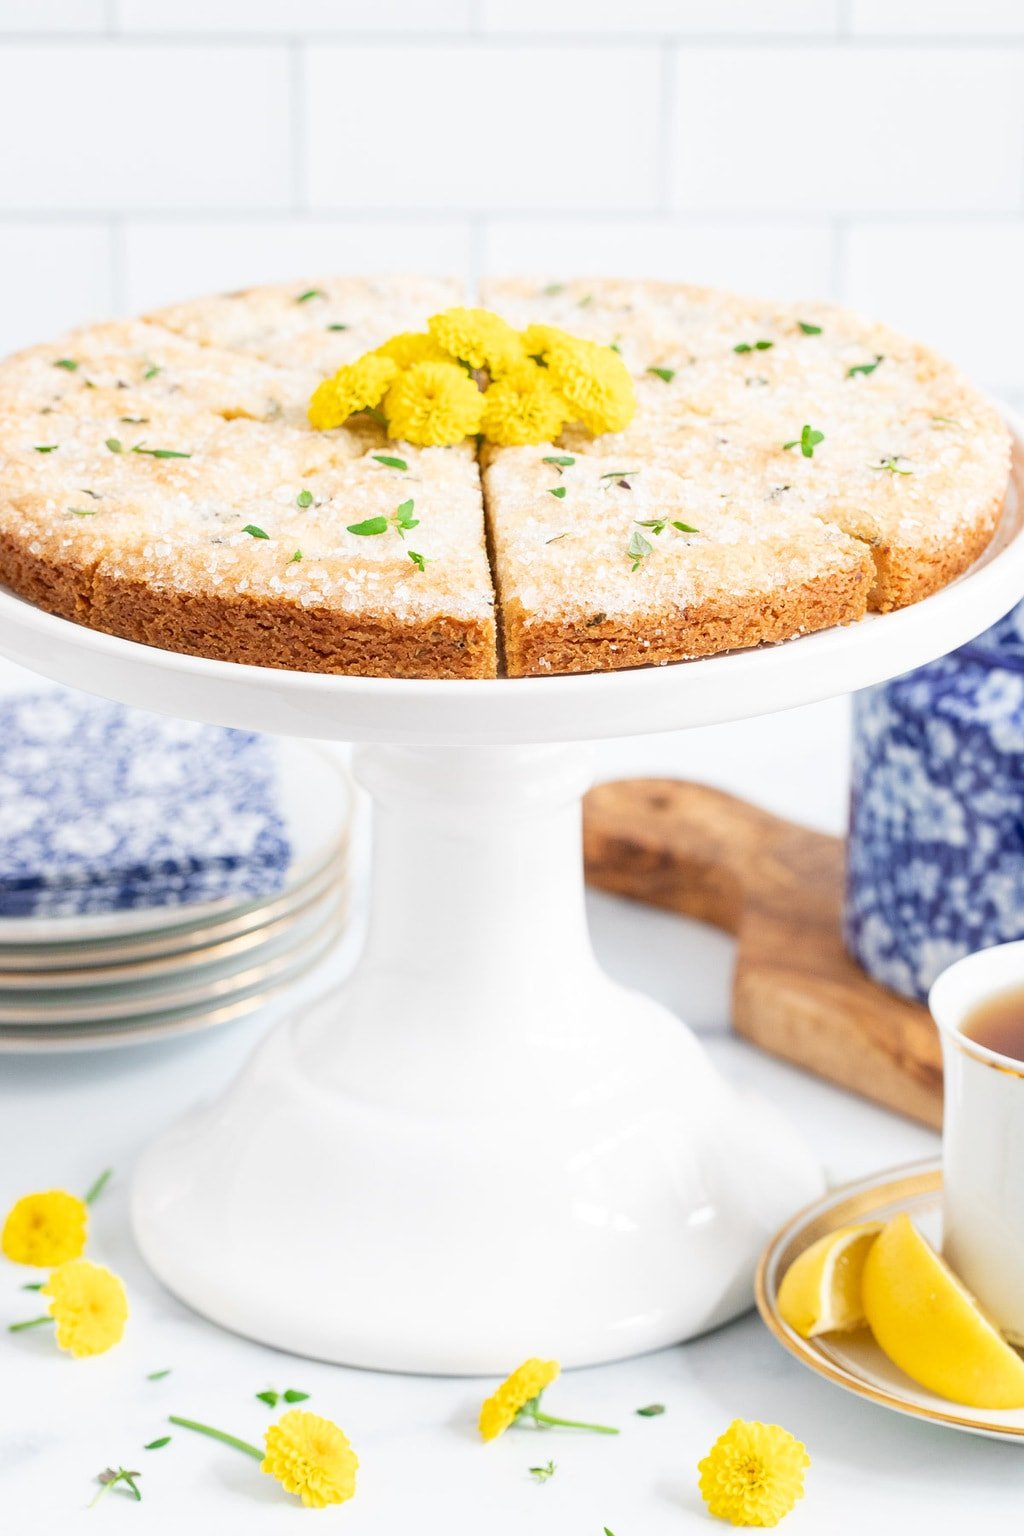 Vertical photo of Lemon Thyme Shortbread on a white pedestal plate. The shortbread is garnished with fresh thyme leaves and yellow daisies.